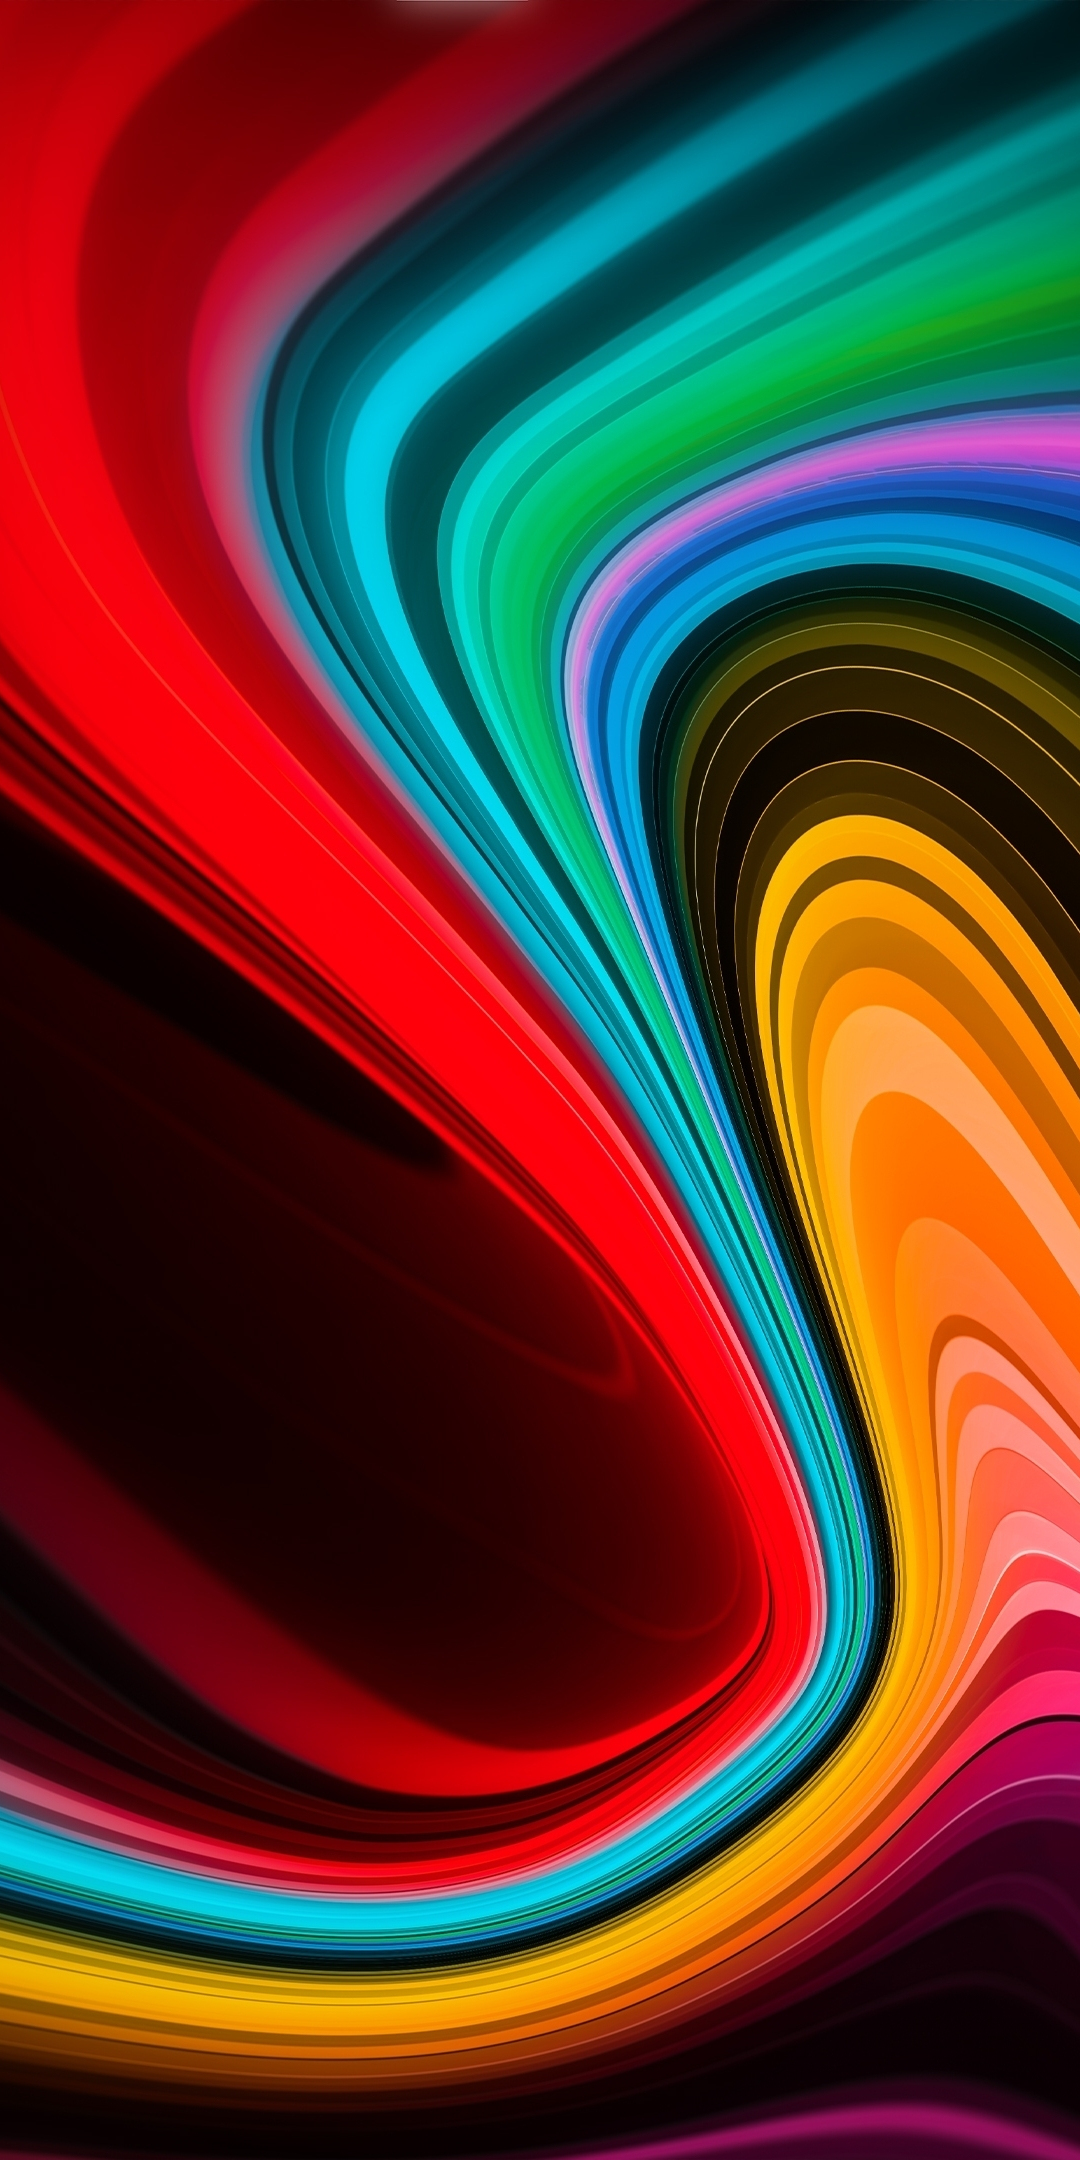 New colors, formation, abstract, 1080x2160 wallpaper